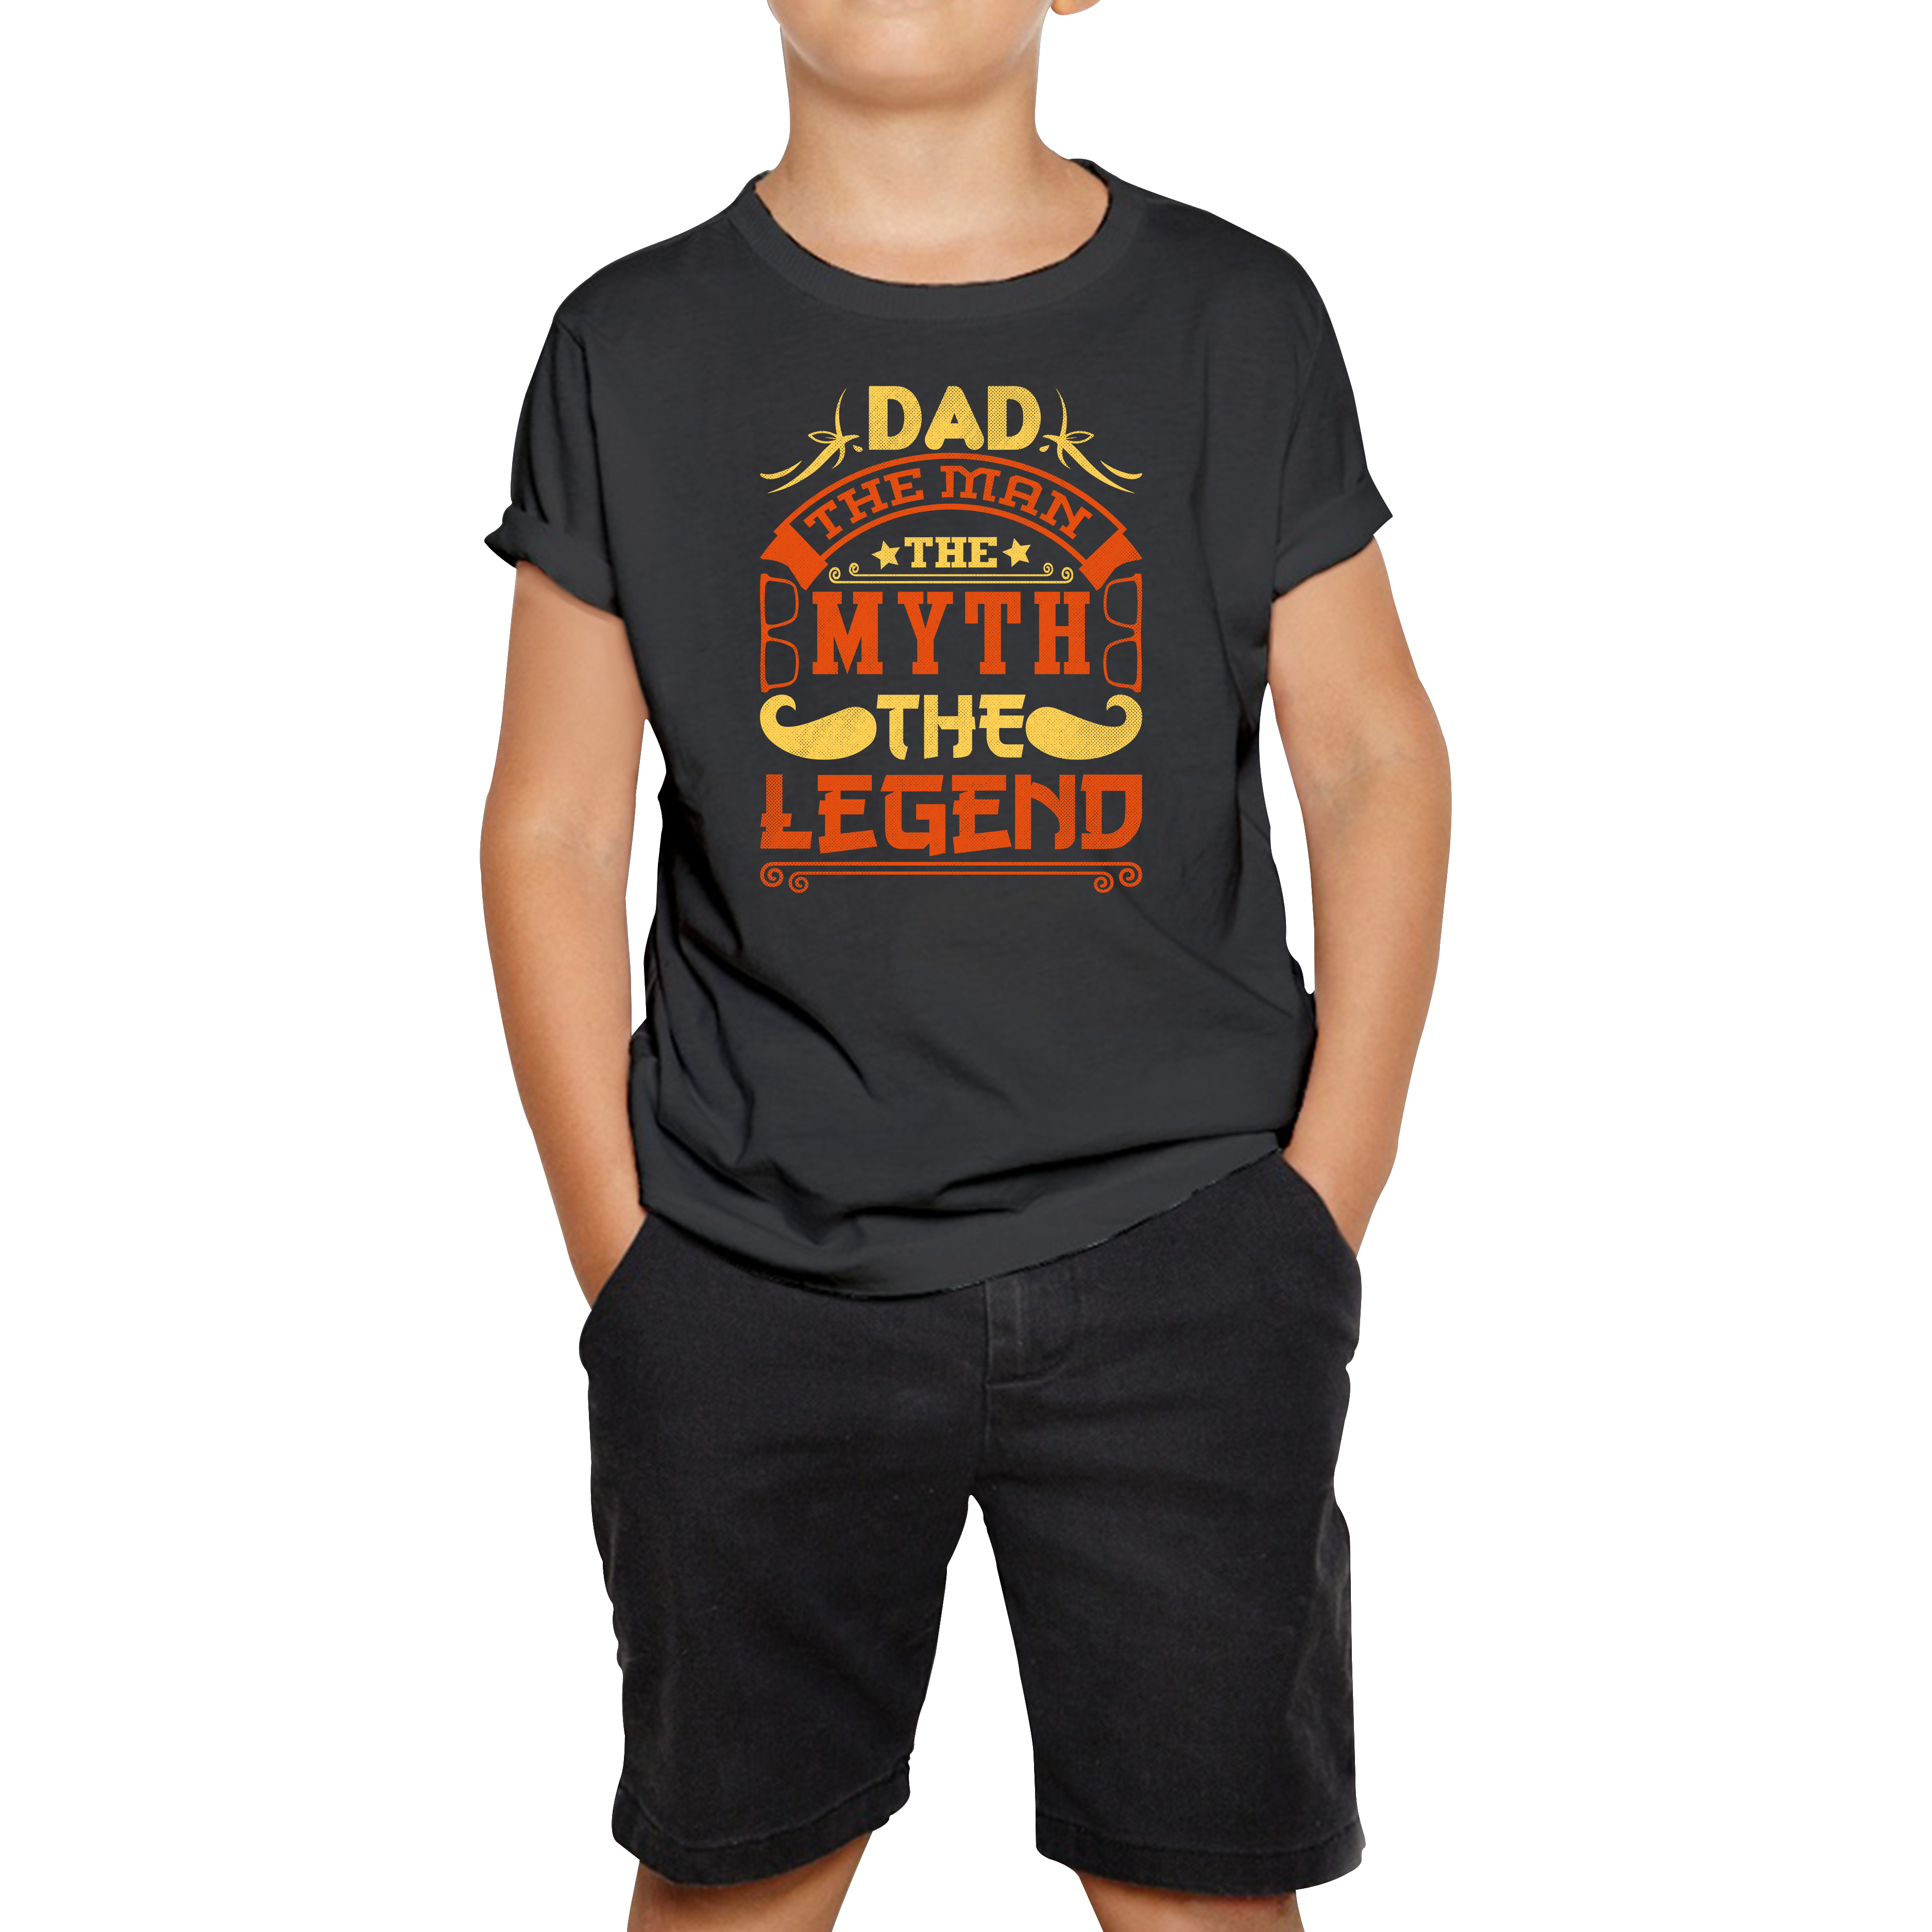 Dad The Man The Myth The Legend T-Shirt Father's Day Best Dad Gift Kids Tee